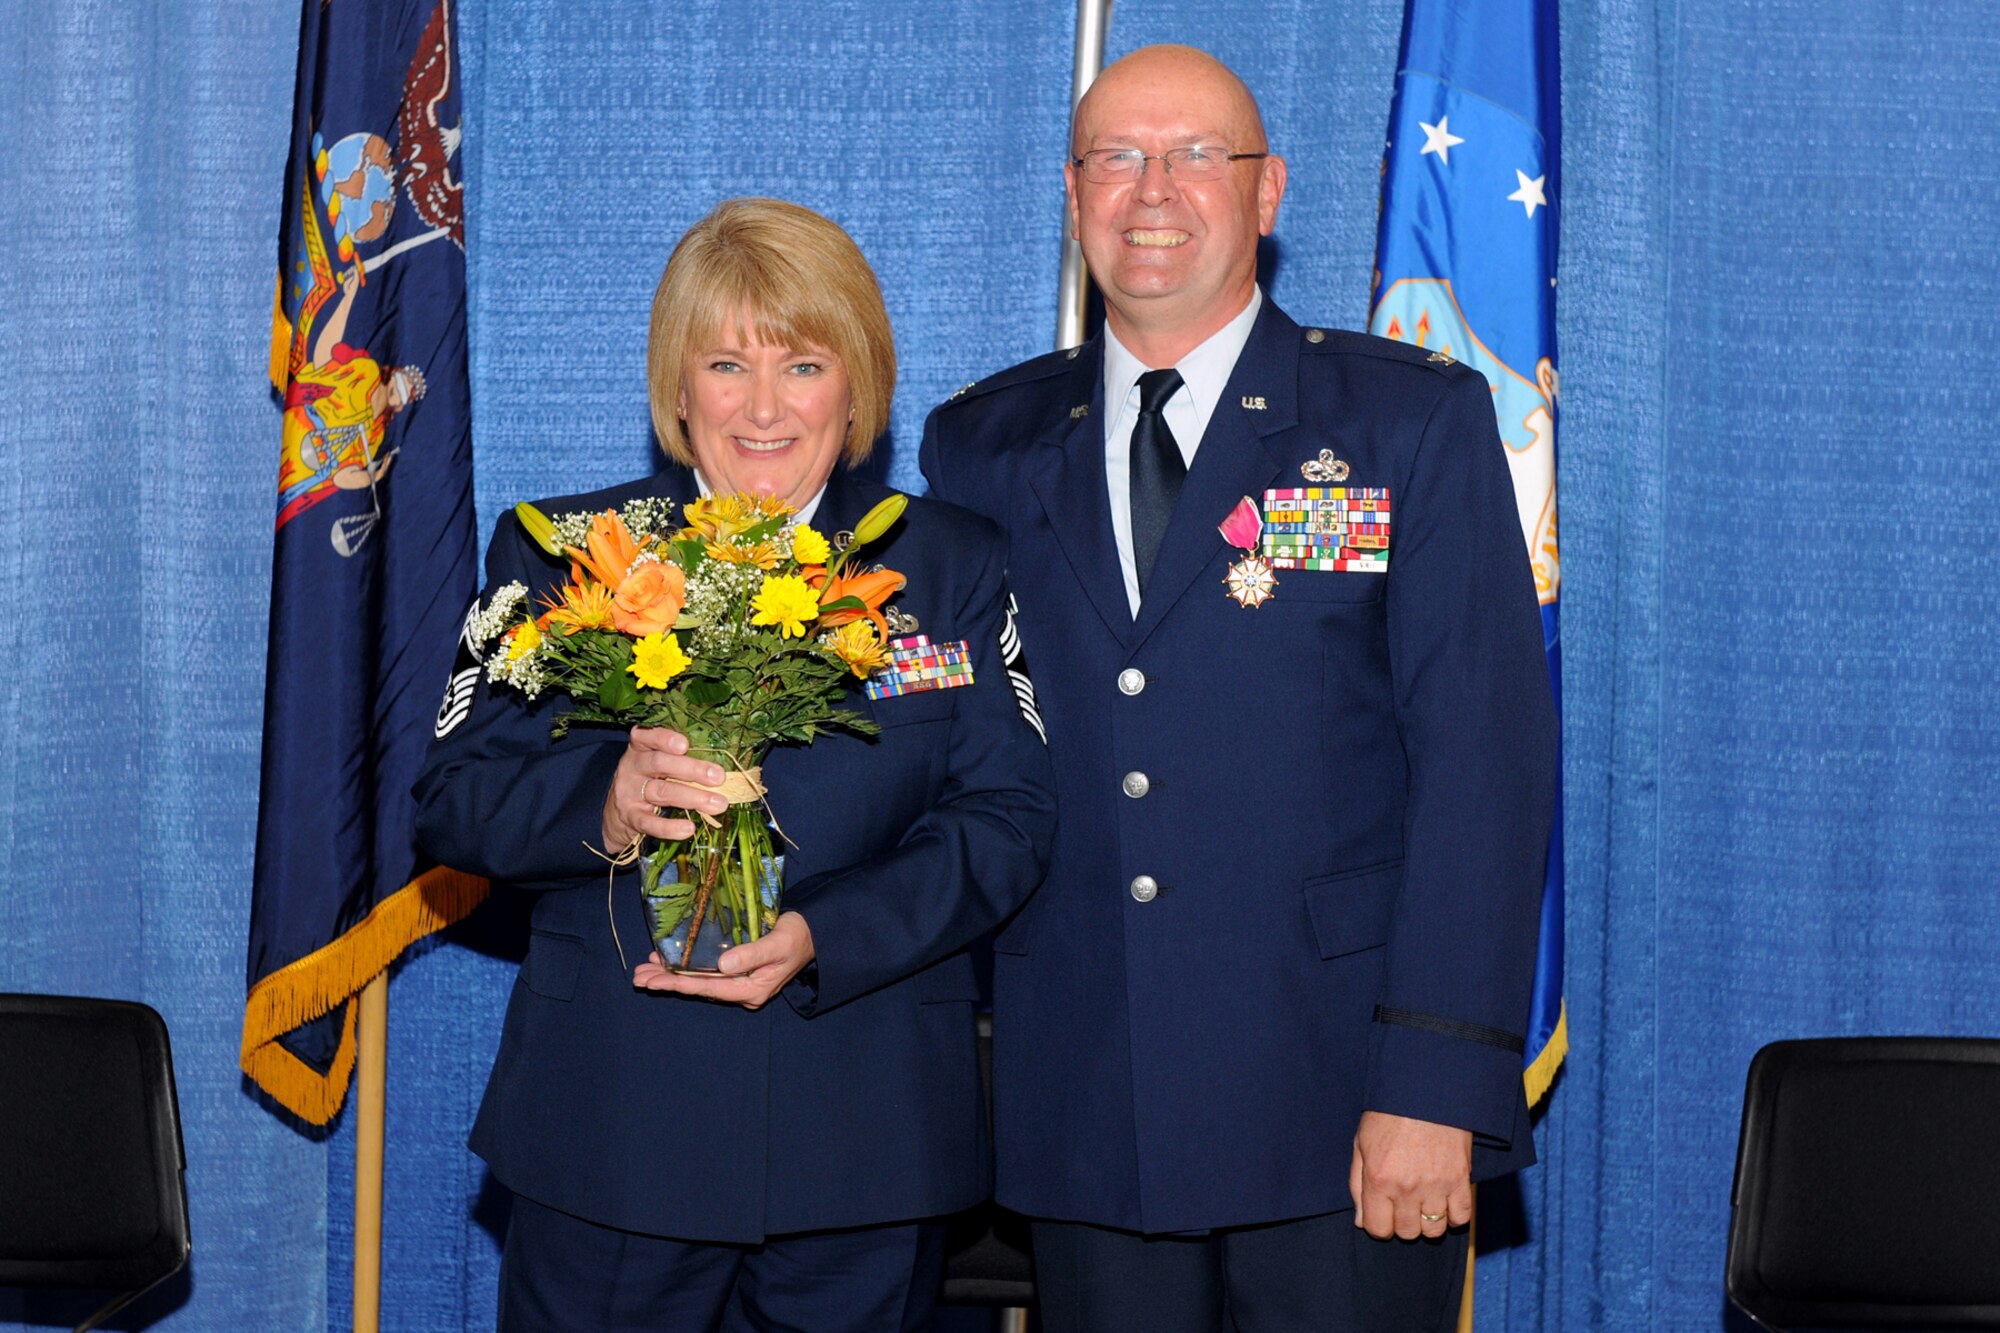 U.S. Air Force Chief Master Sgt. Judy Van Wie (retired) and Col. Harvey Van Wie Col. Harvey (retired) are all smiles during a retirement ceremony held for Col. Van Wie on 5 November 2011 at Hancock Field Air National Guard Base, Syracuse, NY. Col. Van Wie enlisted in the Air Force in 1970 and was the last member of the 174th Fighter Wing to have served in the Vietnam War.